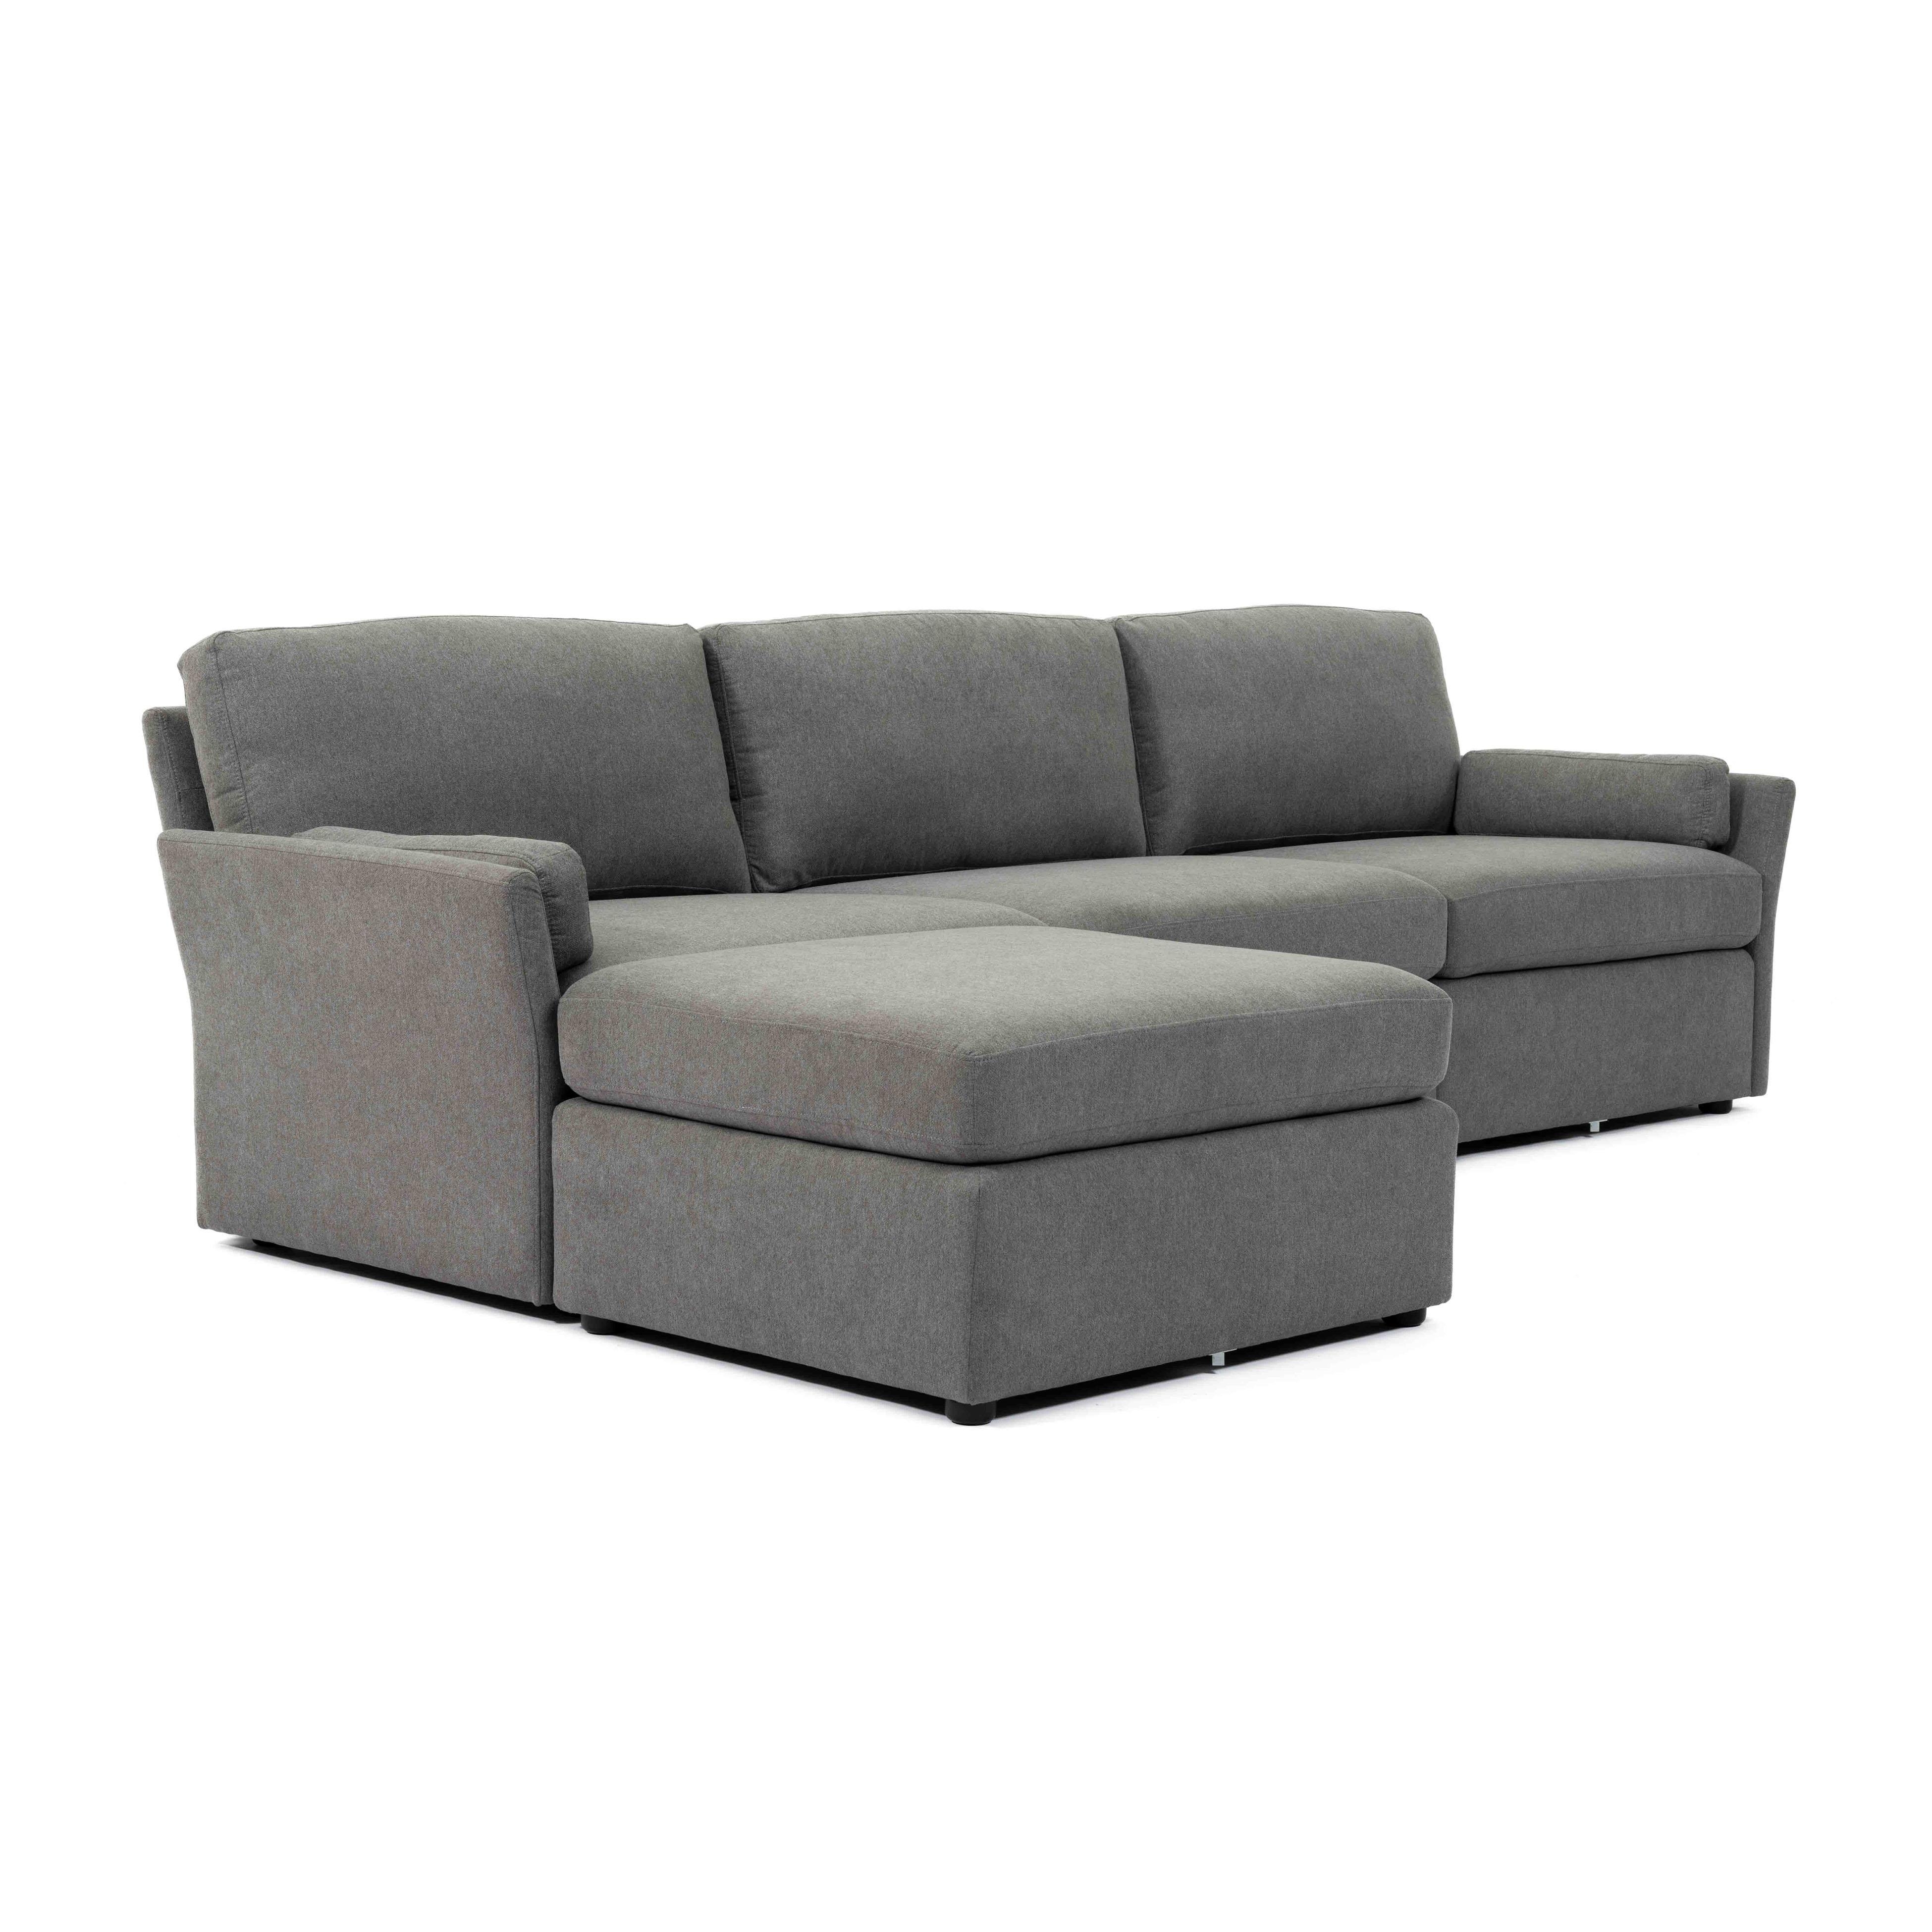 Catarina Gray Chaise Sectional - Image 2